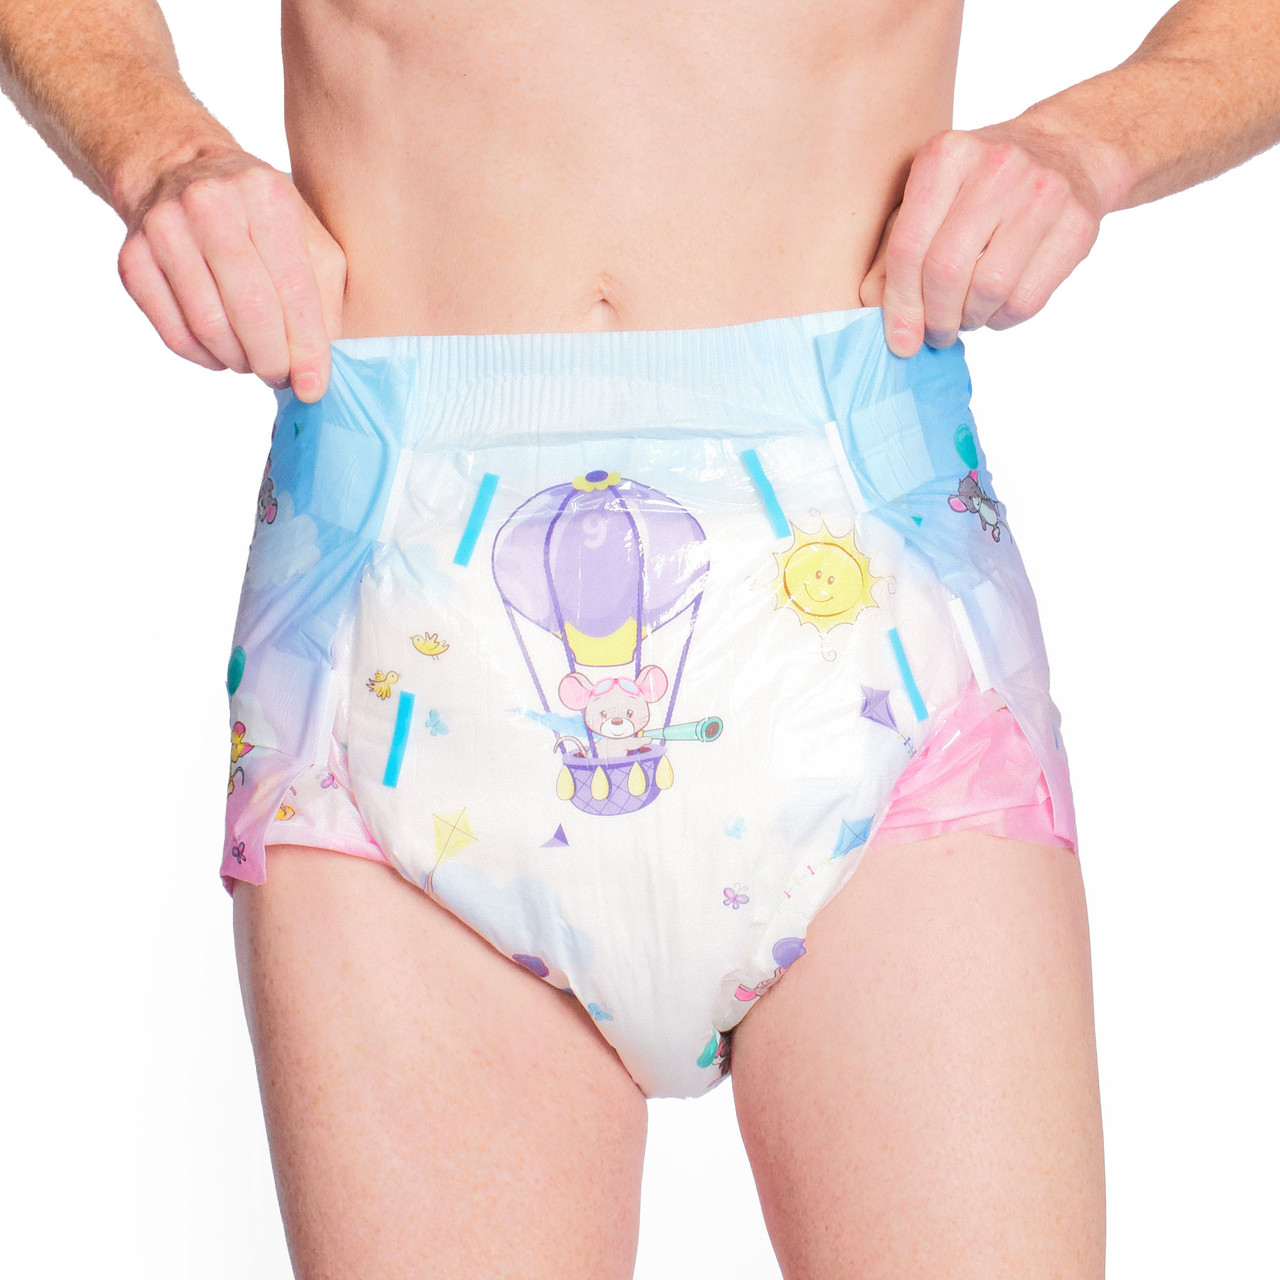 Review of te new Rearz Daydreamers : r/diaperpics